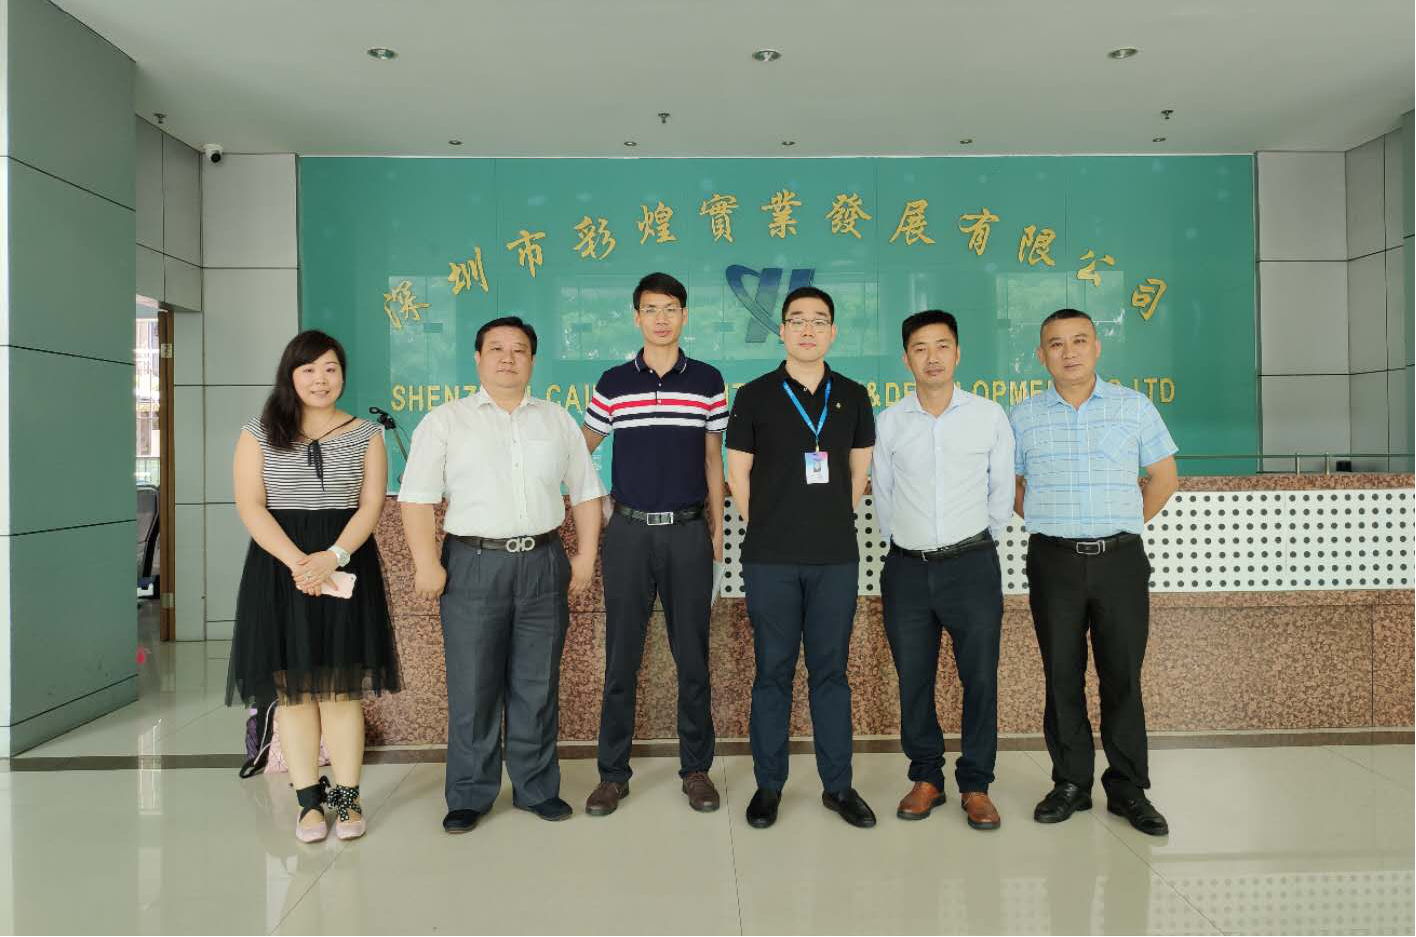 Personnel of Guangdong Laser Industry Association came to visit our company